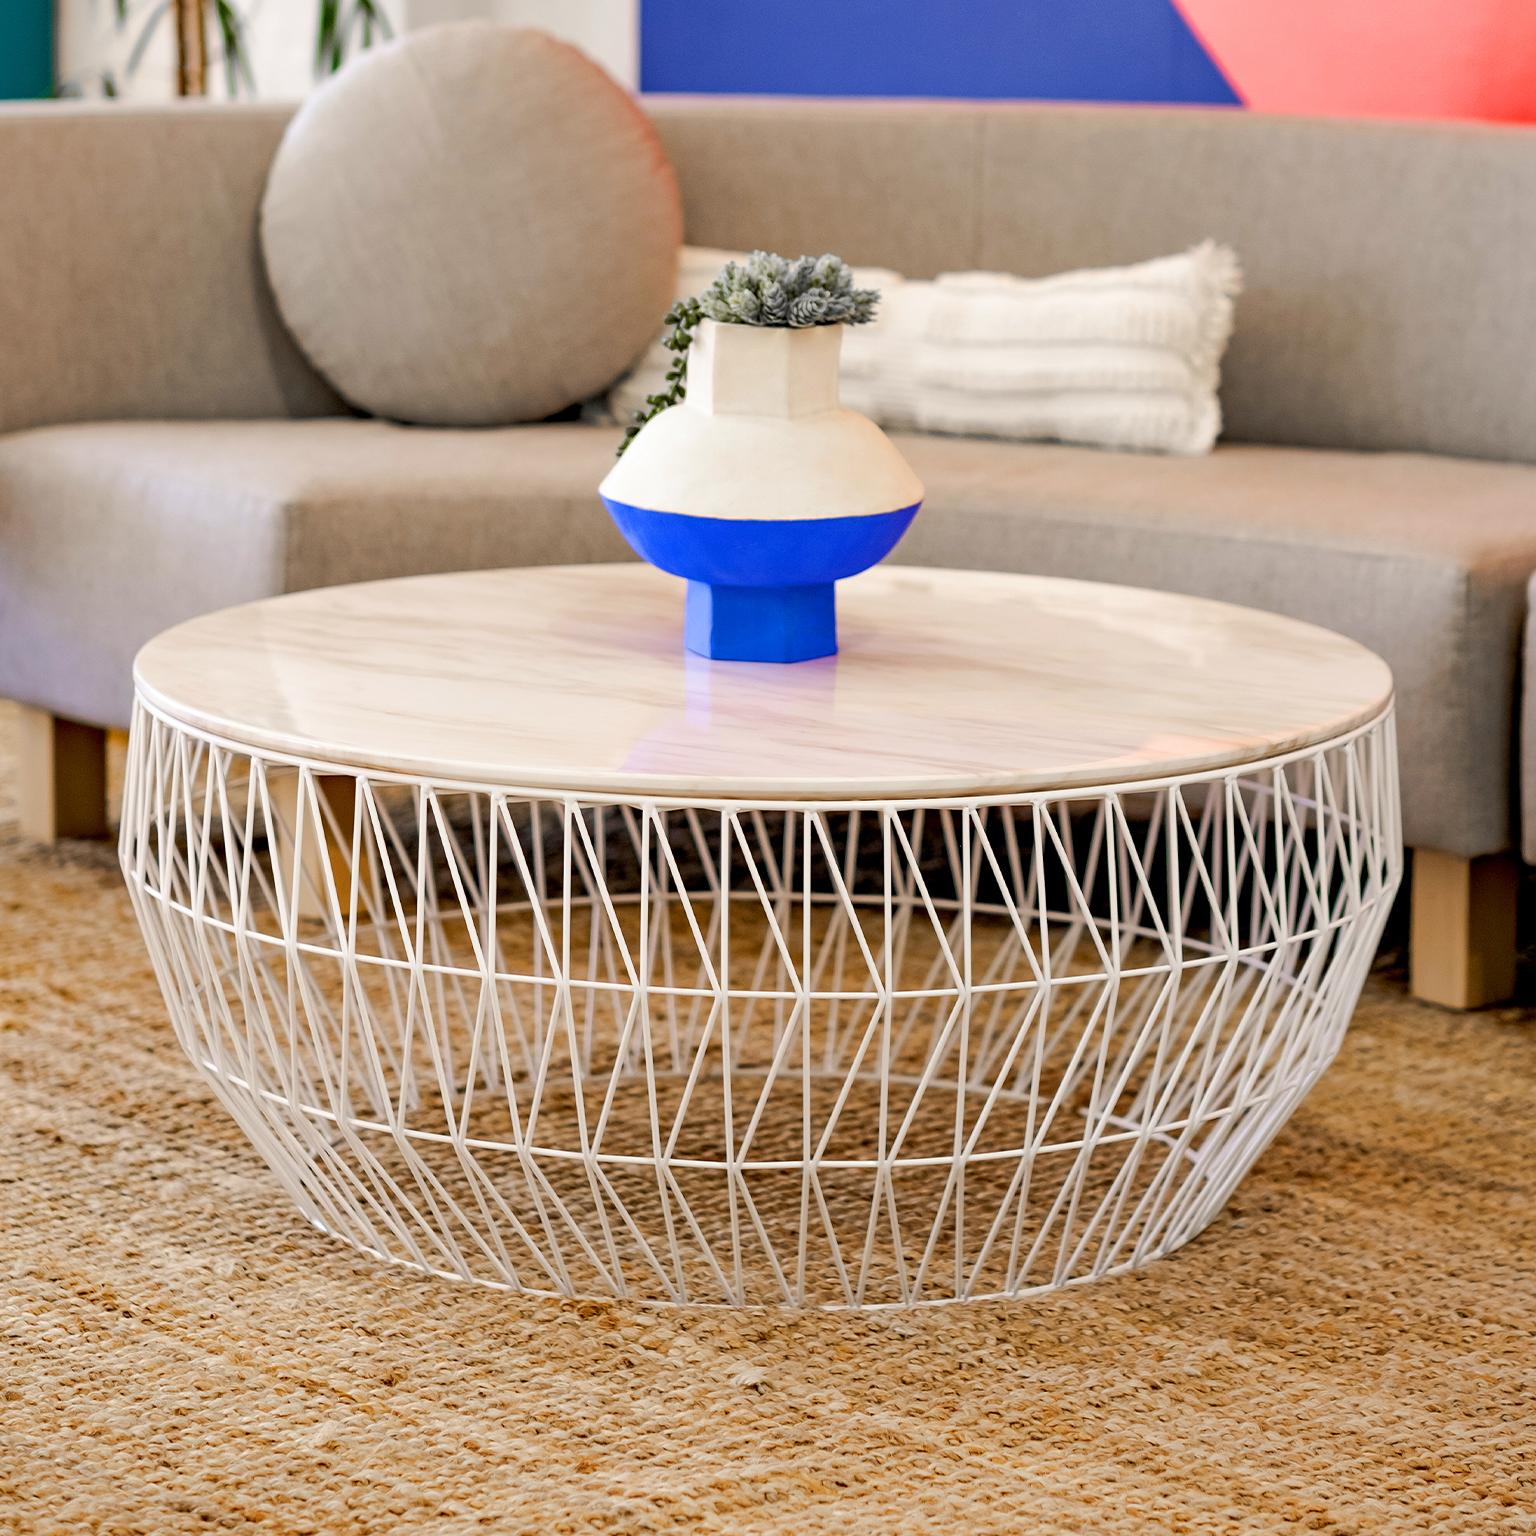 Bend Goods Wire Furniture
Inspired by the modern pattern of the Lucy chair with an elegant wire arrangement that doesn't overwhelm a simple space, The Coffee table keeps it light. Modern Contemporary design with an array of optional tops. *Gold and